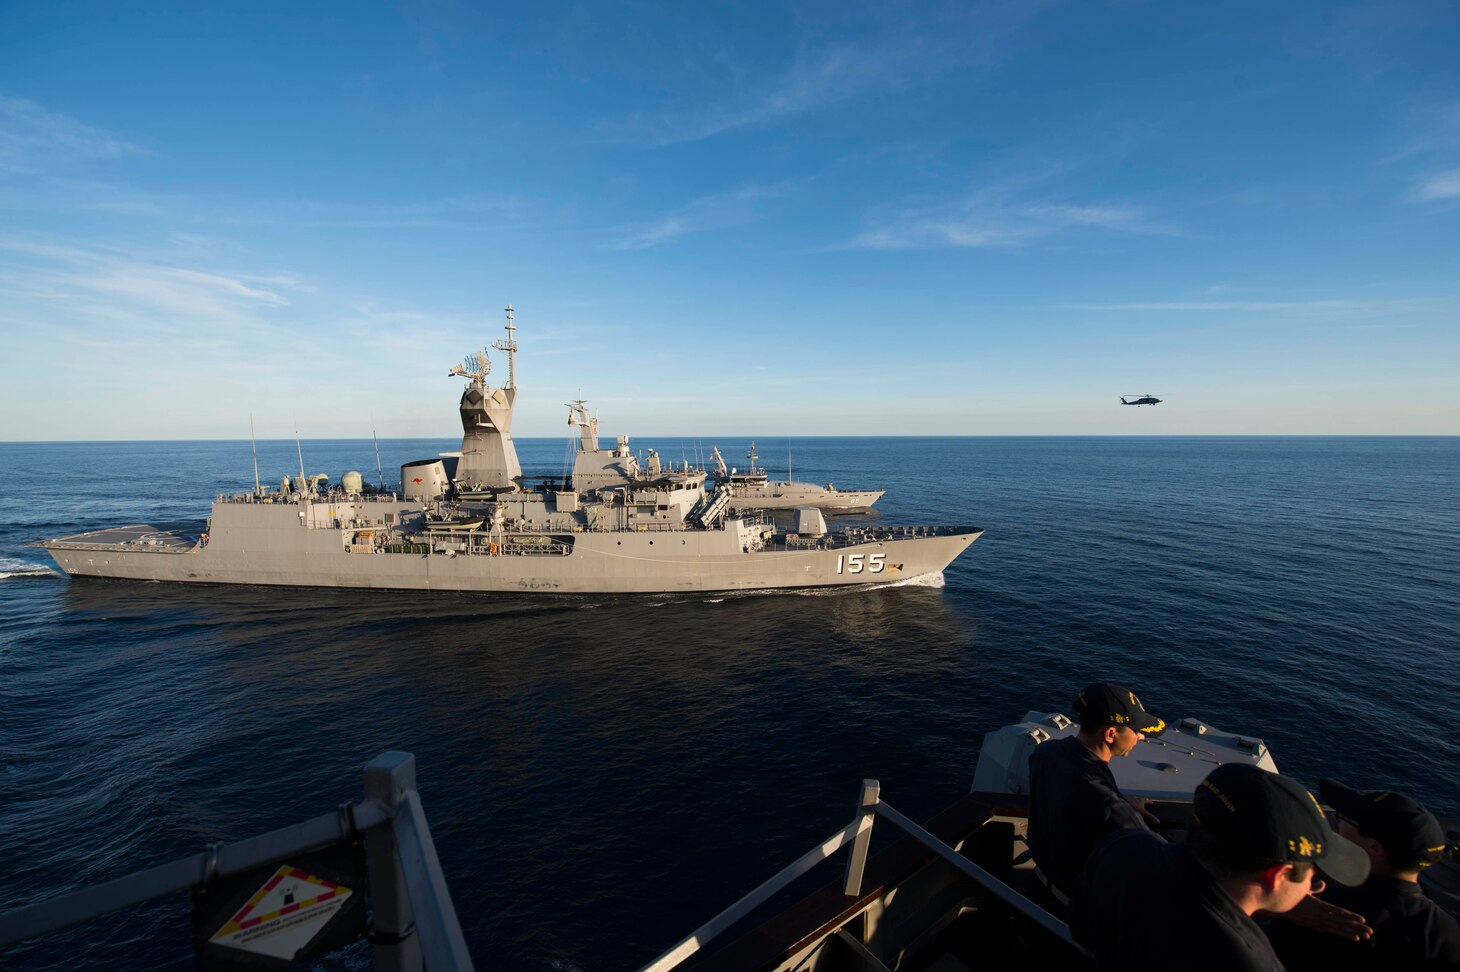 INDIAN OCEAN (June 26, 2017) The Arleigh Burke-class guided-missile destroyer USS John S. McCain (DDG 56) conducts Division Tactics (DIVTACS) exercises with the Royal Australian Navy Anzac-class frigate HMAS Ballart (FFH 155) and the Armidale class patrol boat HMAS Bathurst (ACPB 85). McCain is participating in Talisman Saber 2017 Field Training Exercise-North providing the U.S. and Australia realistic combined, joint, and interagency training to promote regional security, peace and stability in the Indo-Asia-Pacific region.